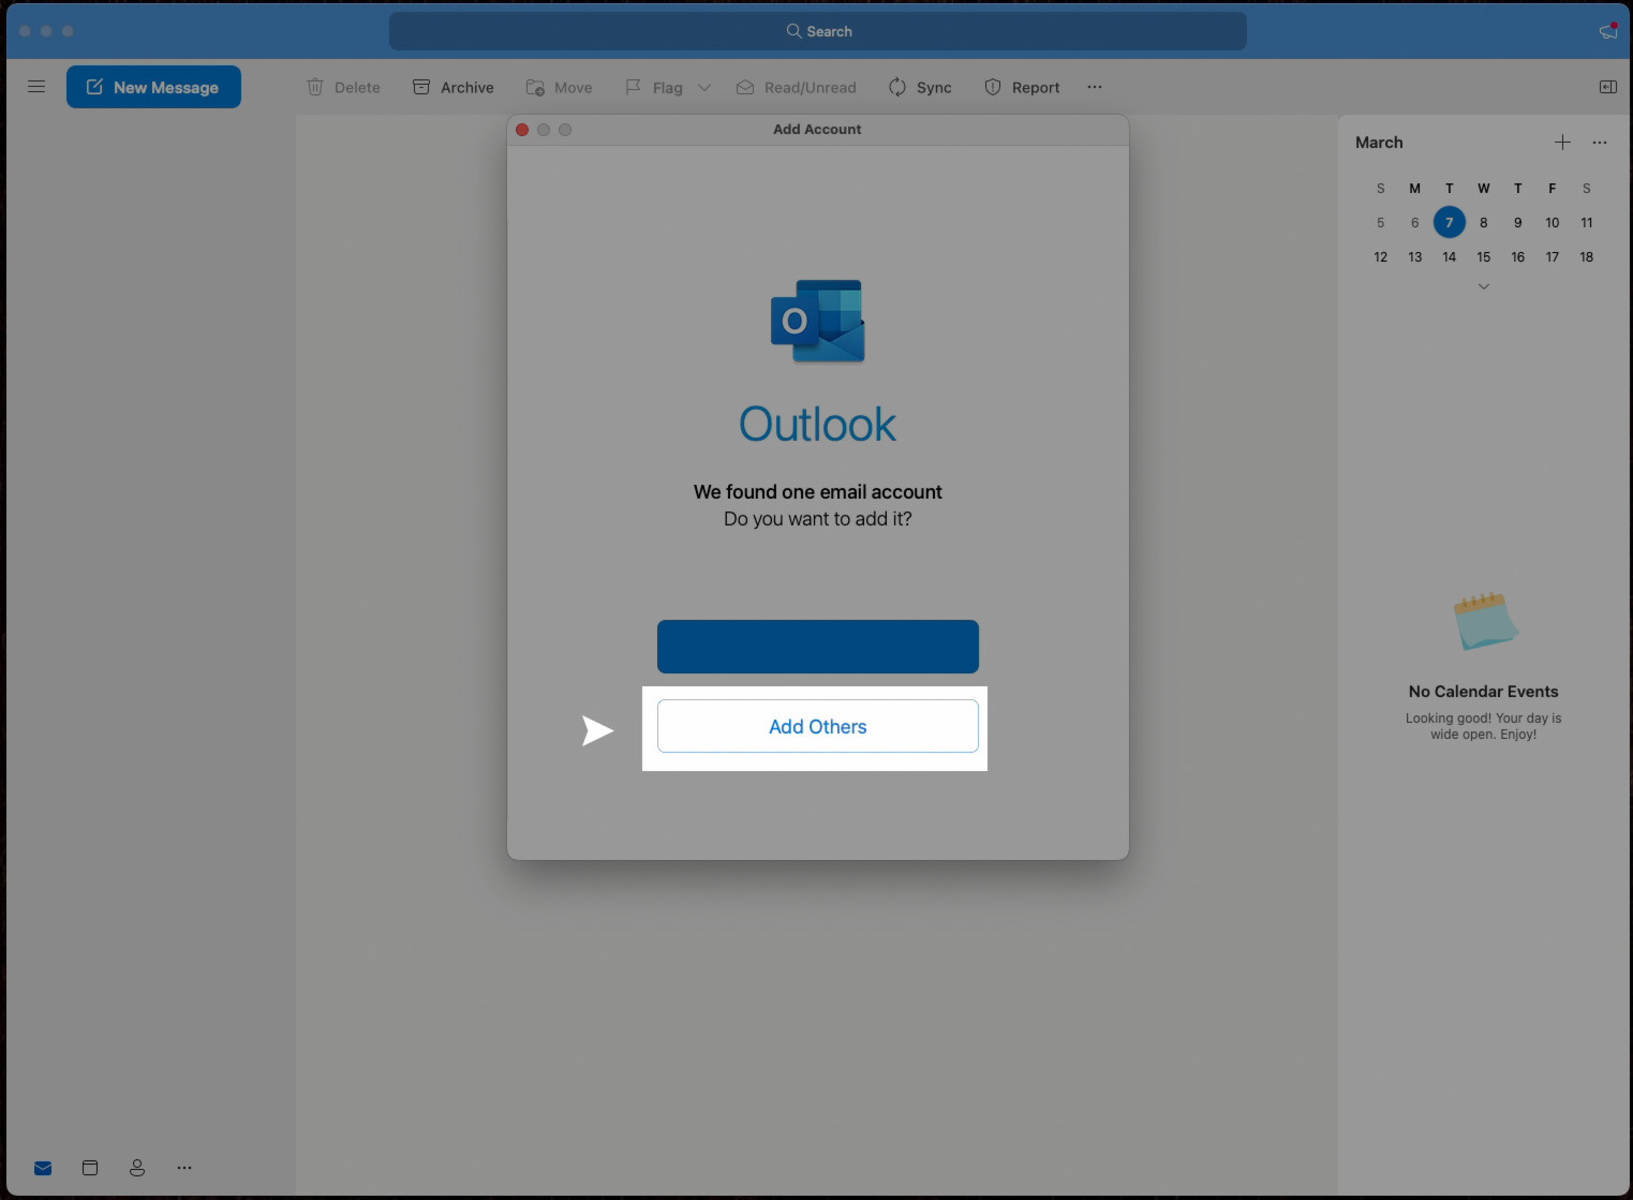 1) Install Outlook for Mac, then open the app and choose Add Others.